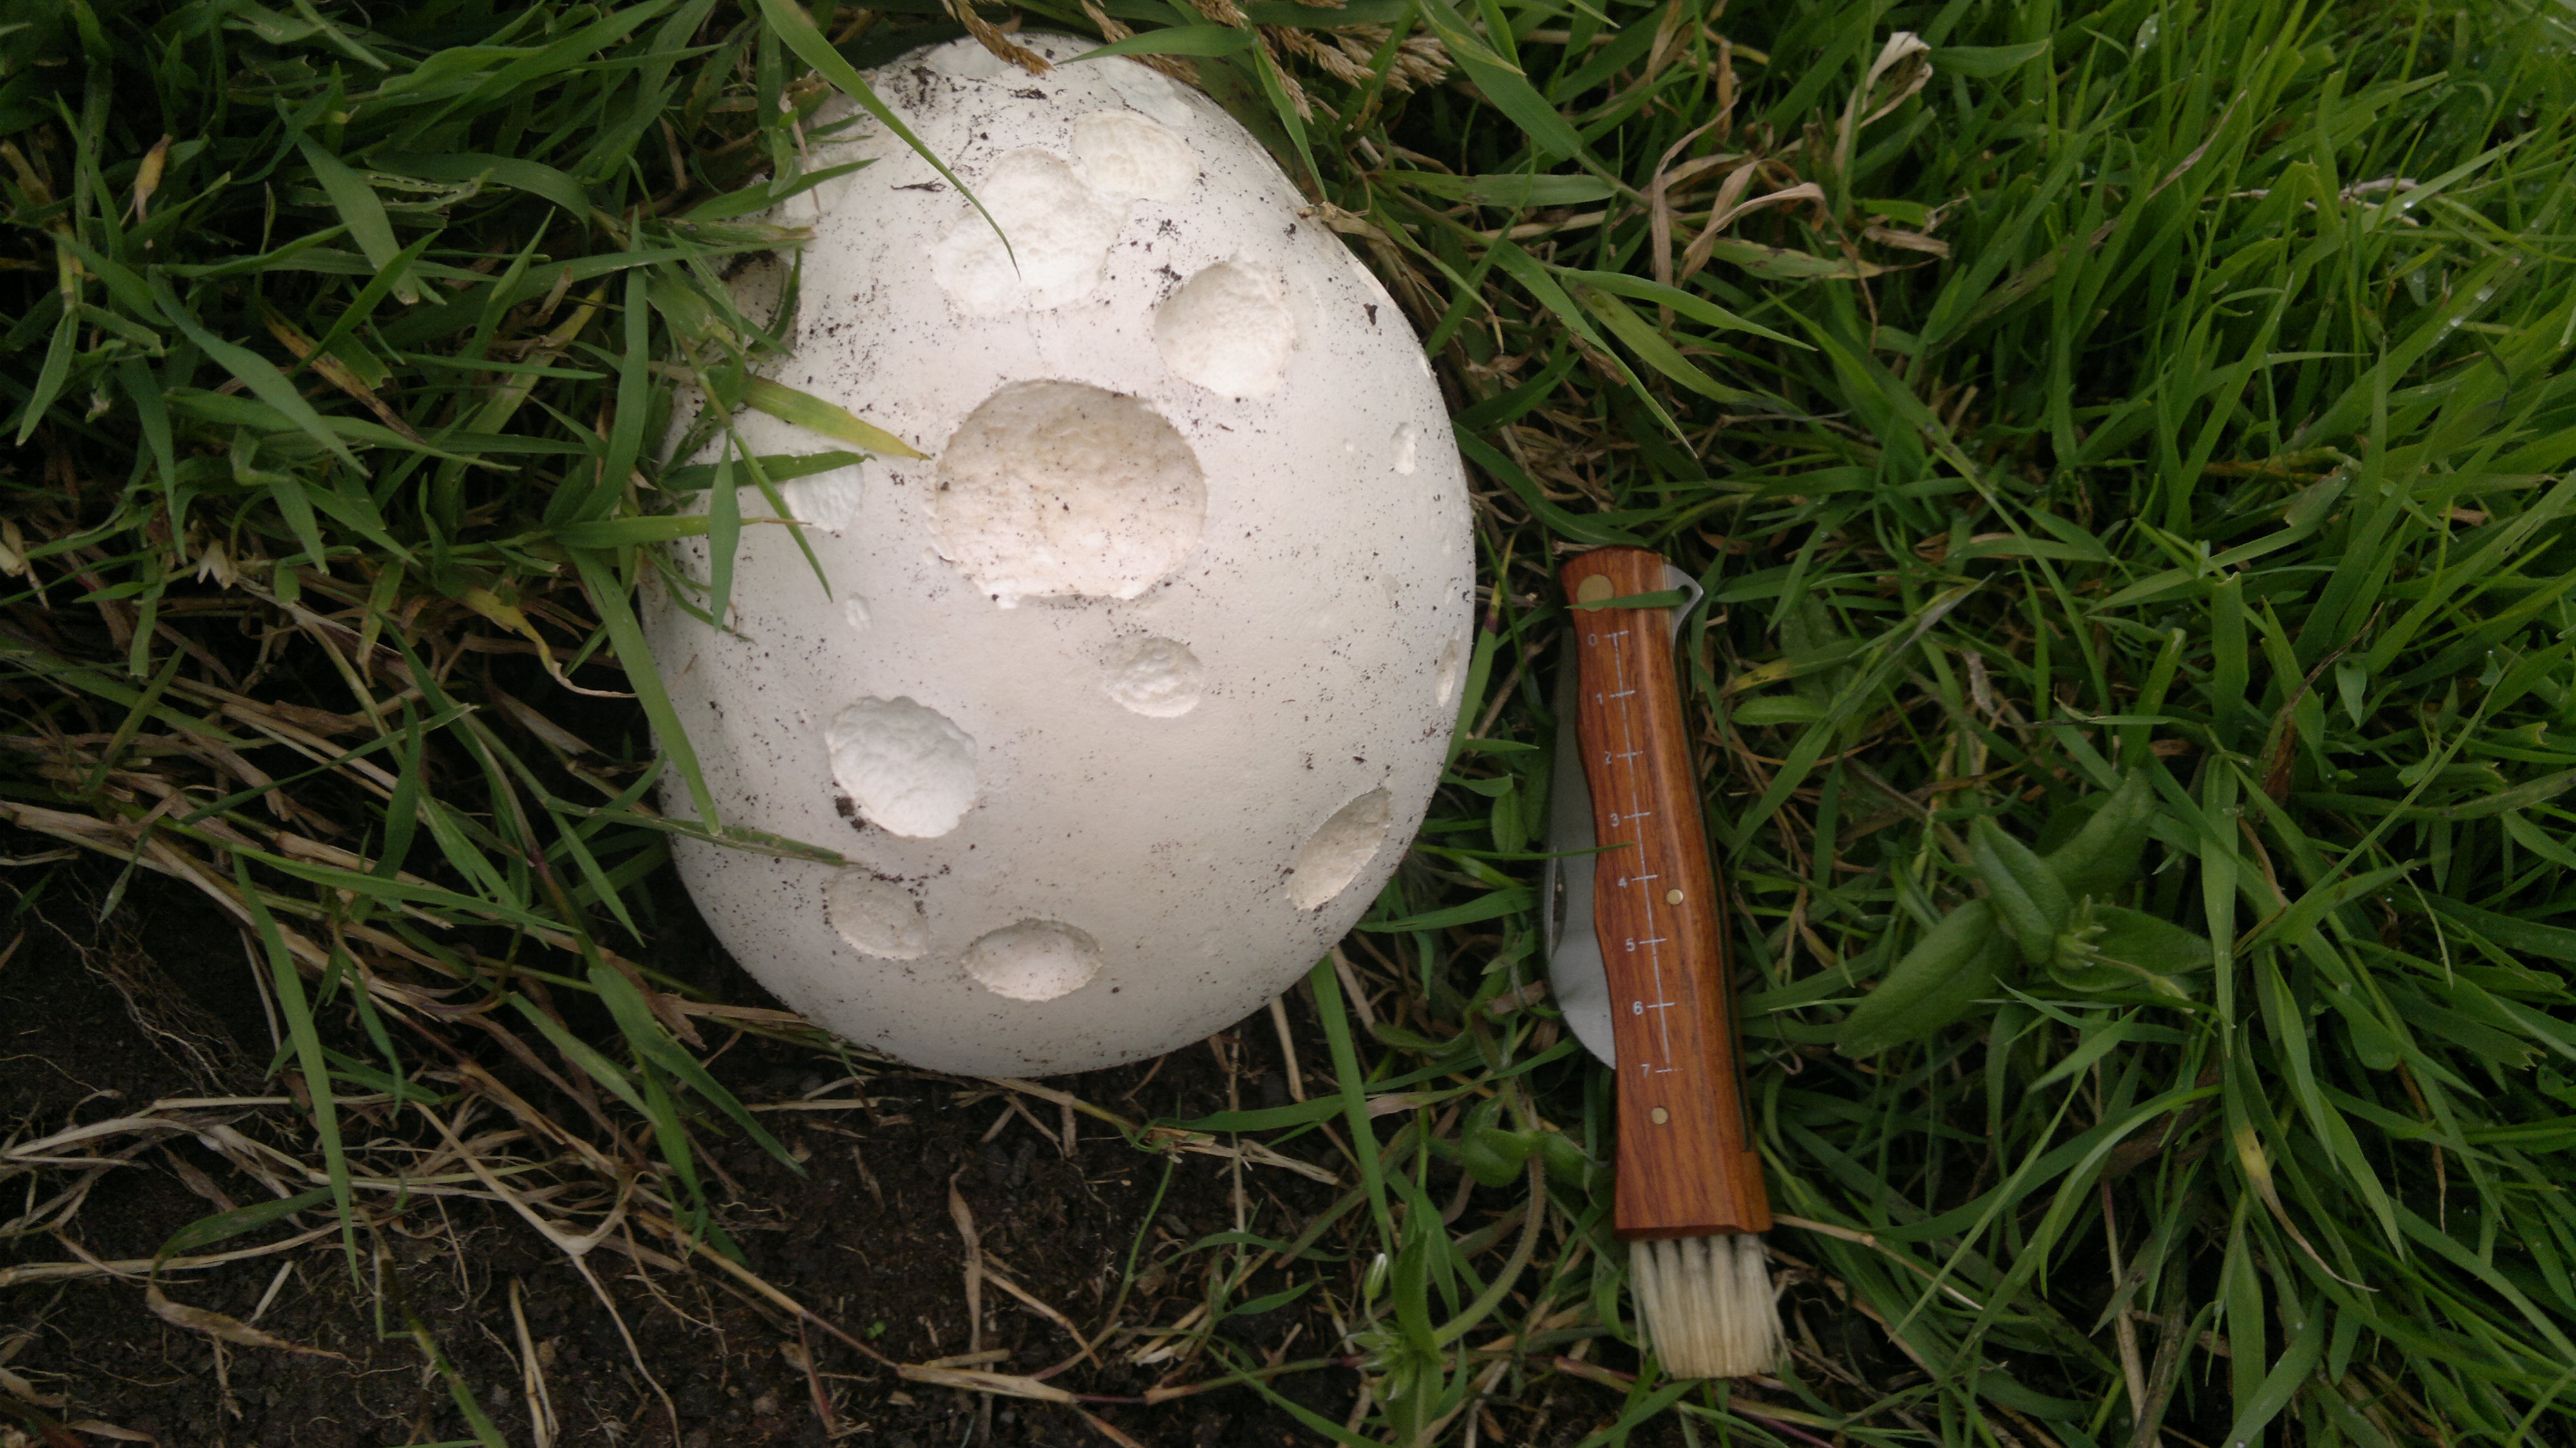 Giant Puffball and Other Edible Wild Puffball Mushrooms 